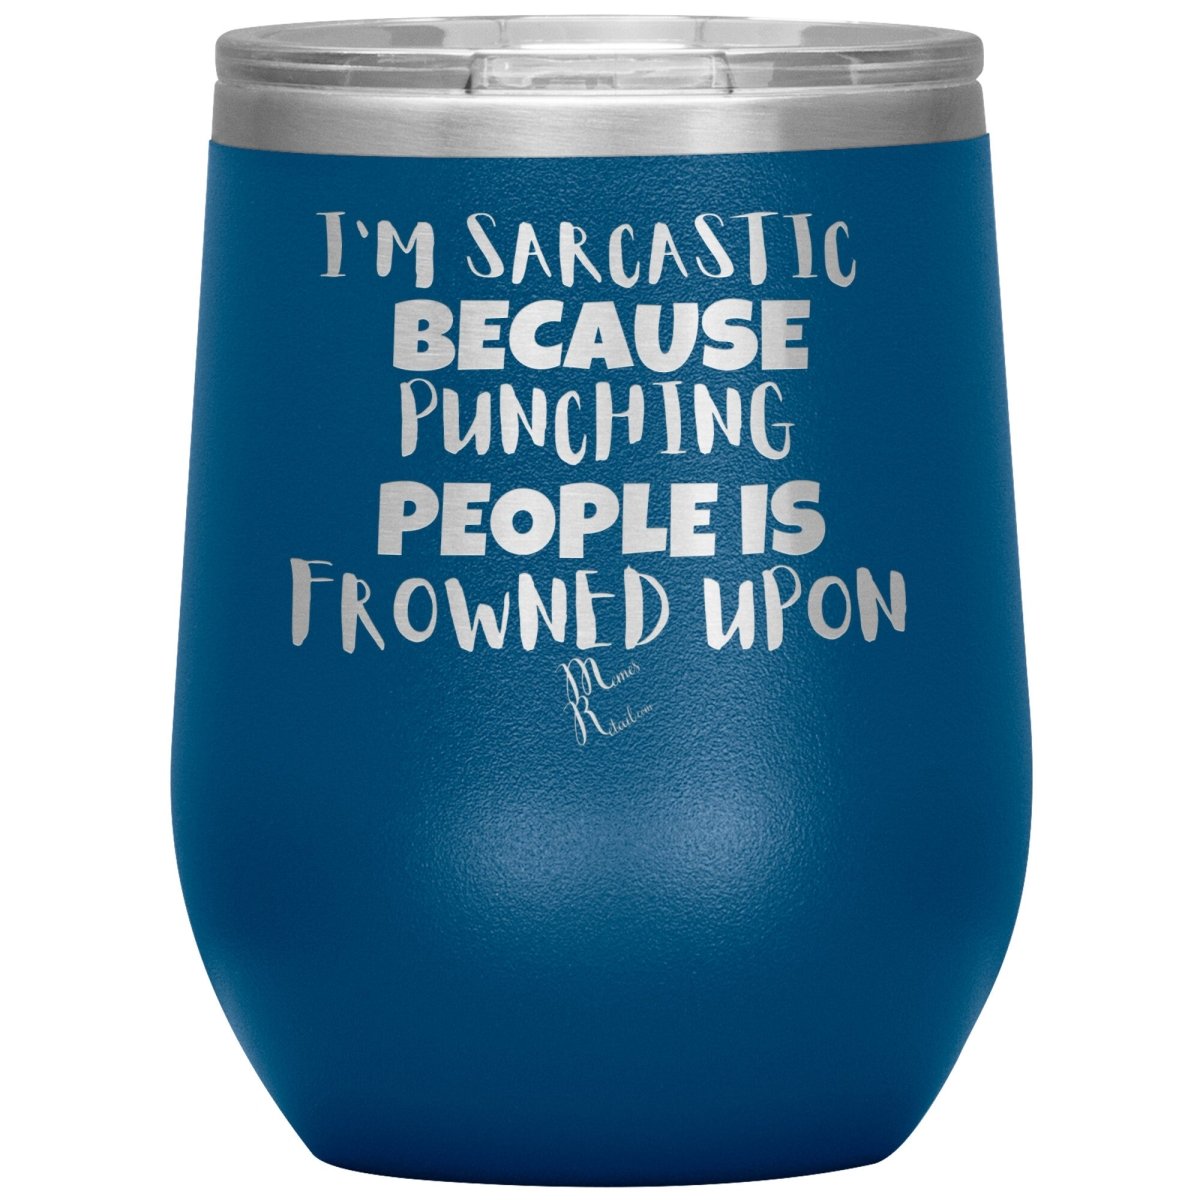 I'm Sarcastic Because Punching People is Frowned Upon Tumblers, 12oz Wine Insulated Tumbler / Blue - MemesRetail.com